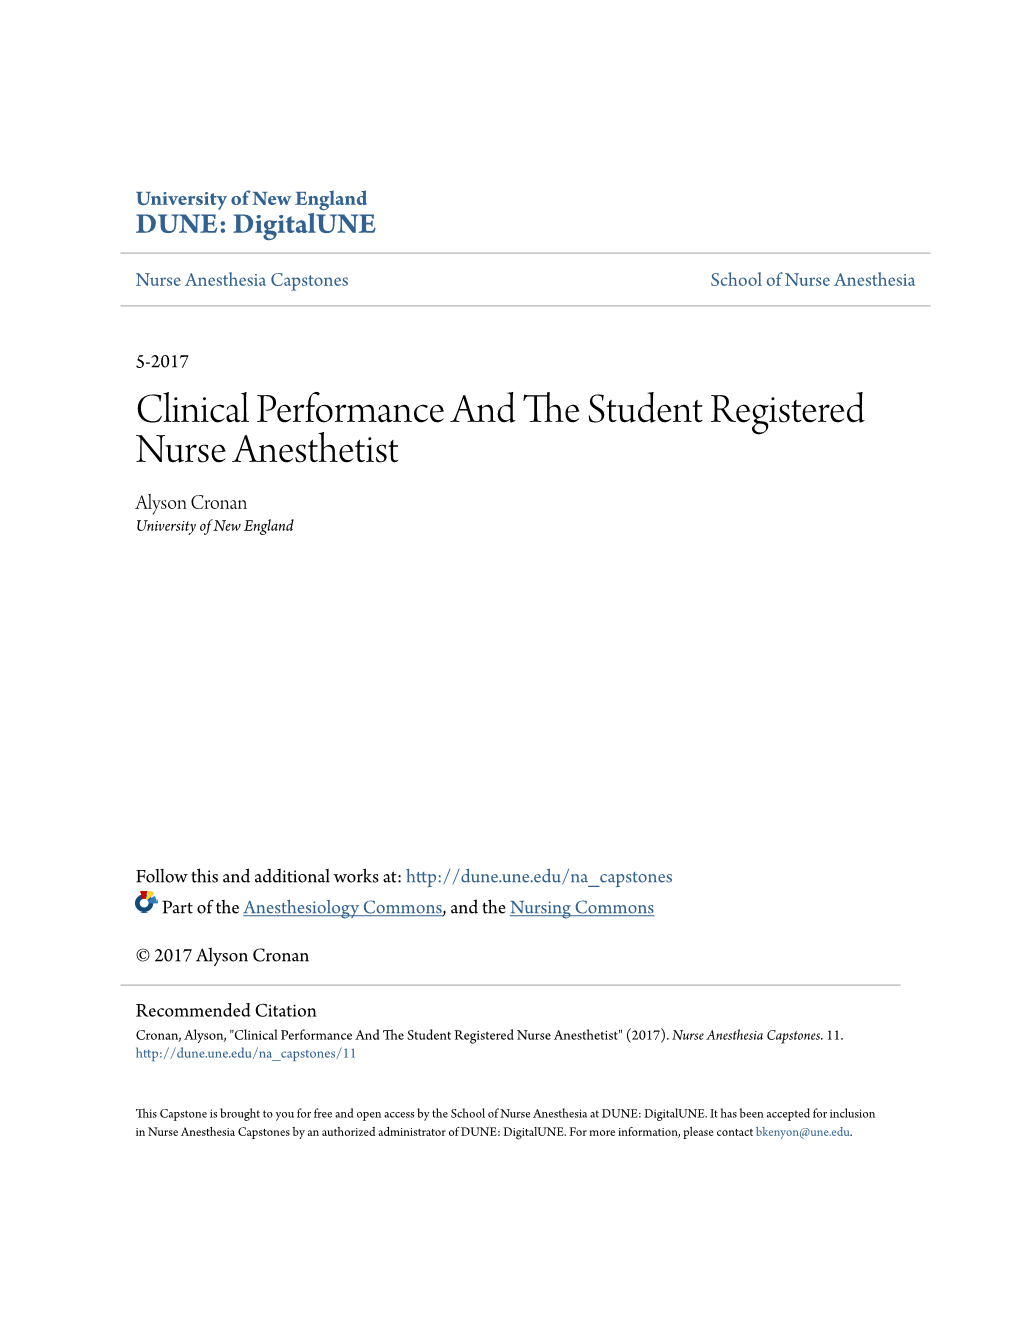 Clinical Performance and the Student Registered Nurse Anesthetist